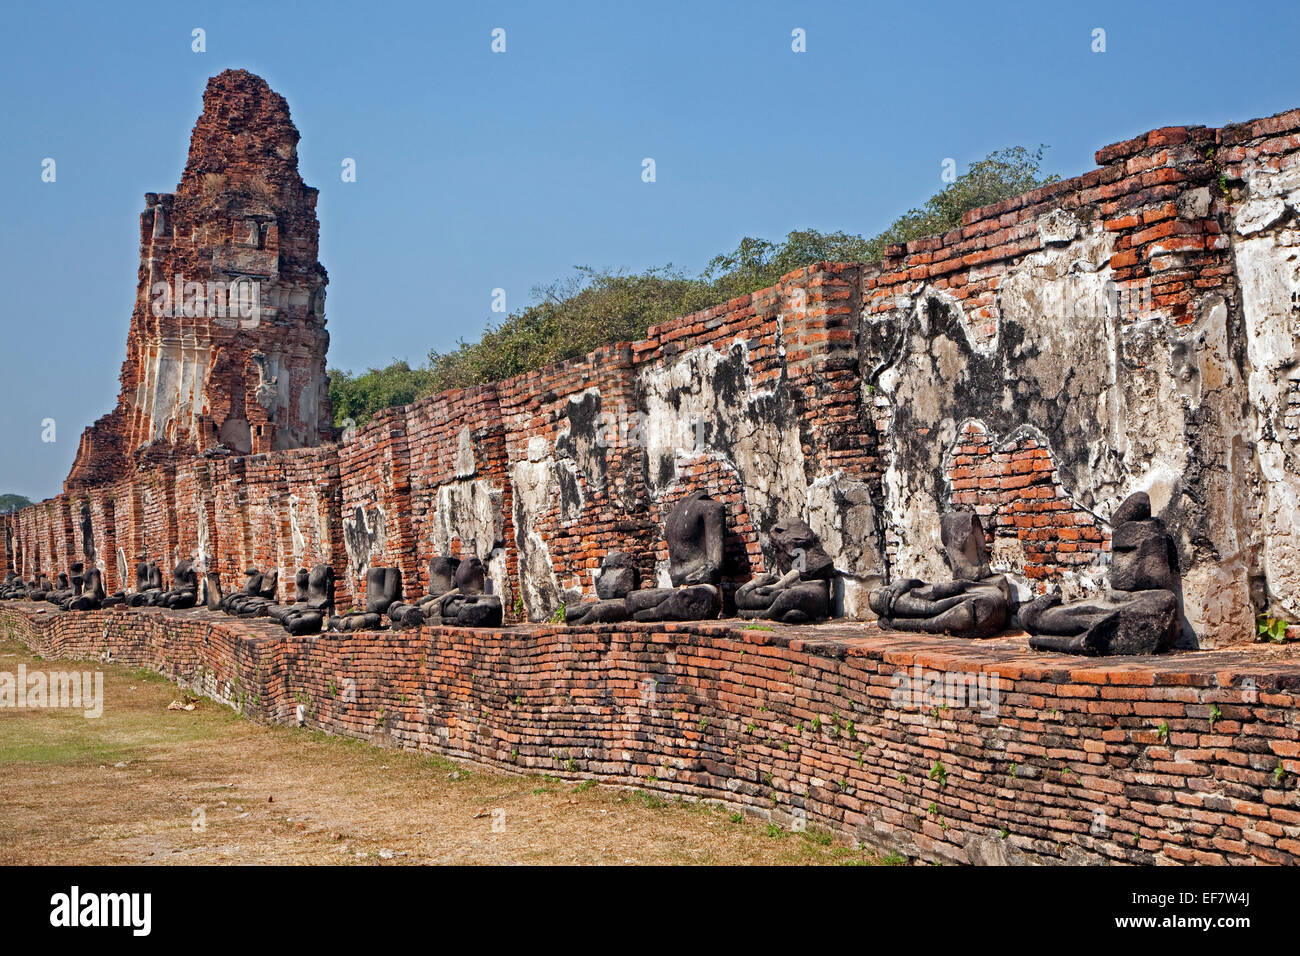 Ruin of Buddhist stupa with row of broken Buddha statues at Wat Mahathat in the Ayutthaya Historical Park, Thailand Stock Photo